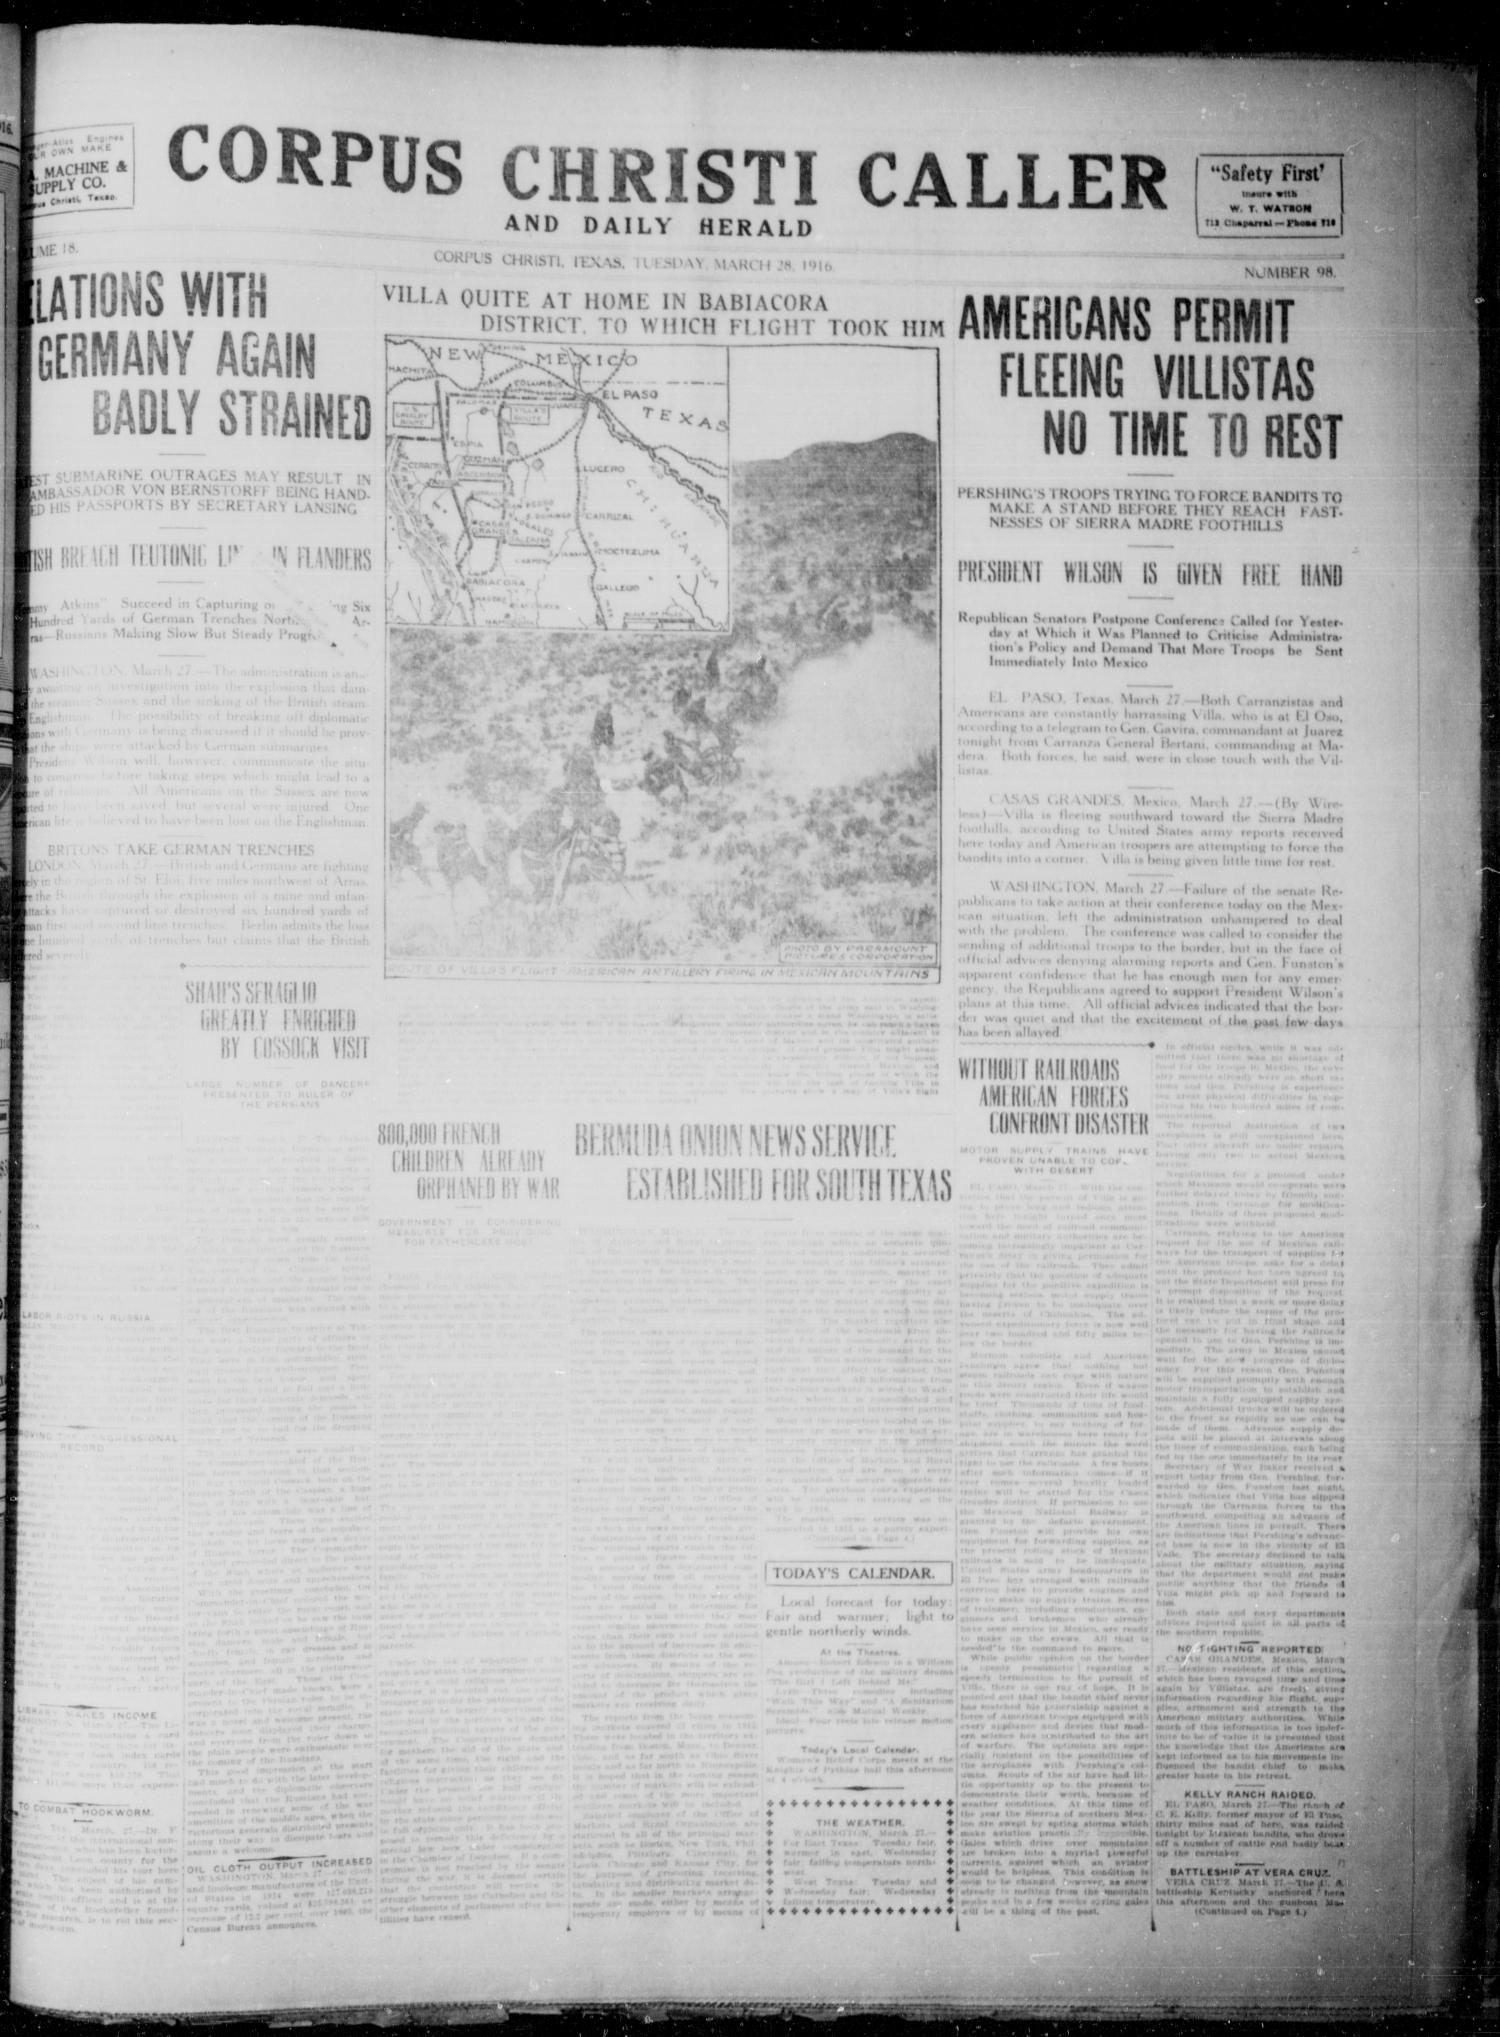 Corpus Christi Caller and Daily Herald (Corpus Christi, Tex.), Vol. 18, No. 98, Ed. 1, Tuesday, March 28, 1916
                                                
                                                    [Sequence #]: 1 of 6
                                                